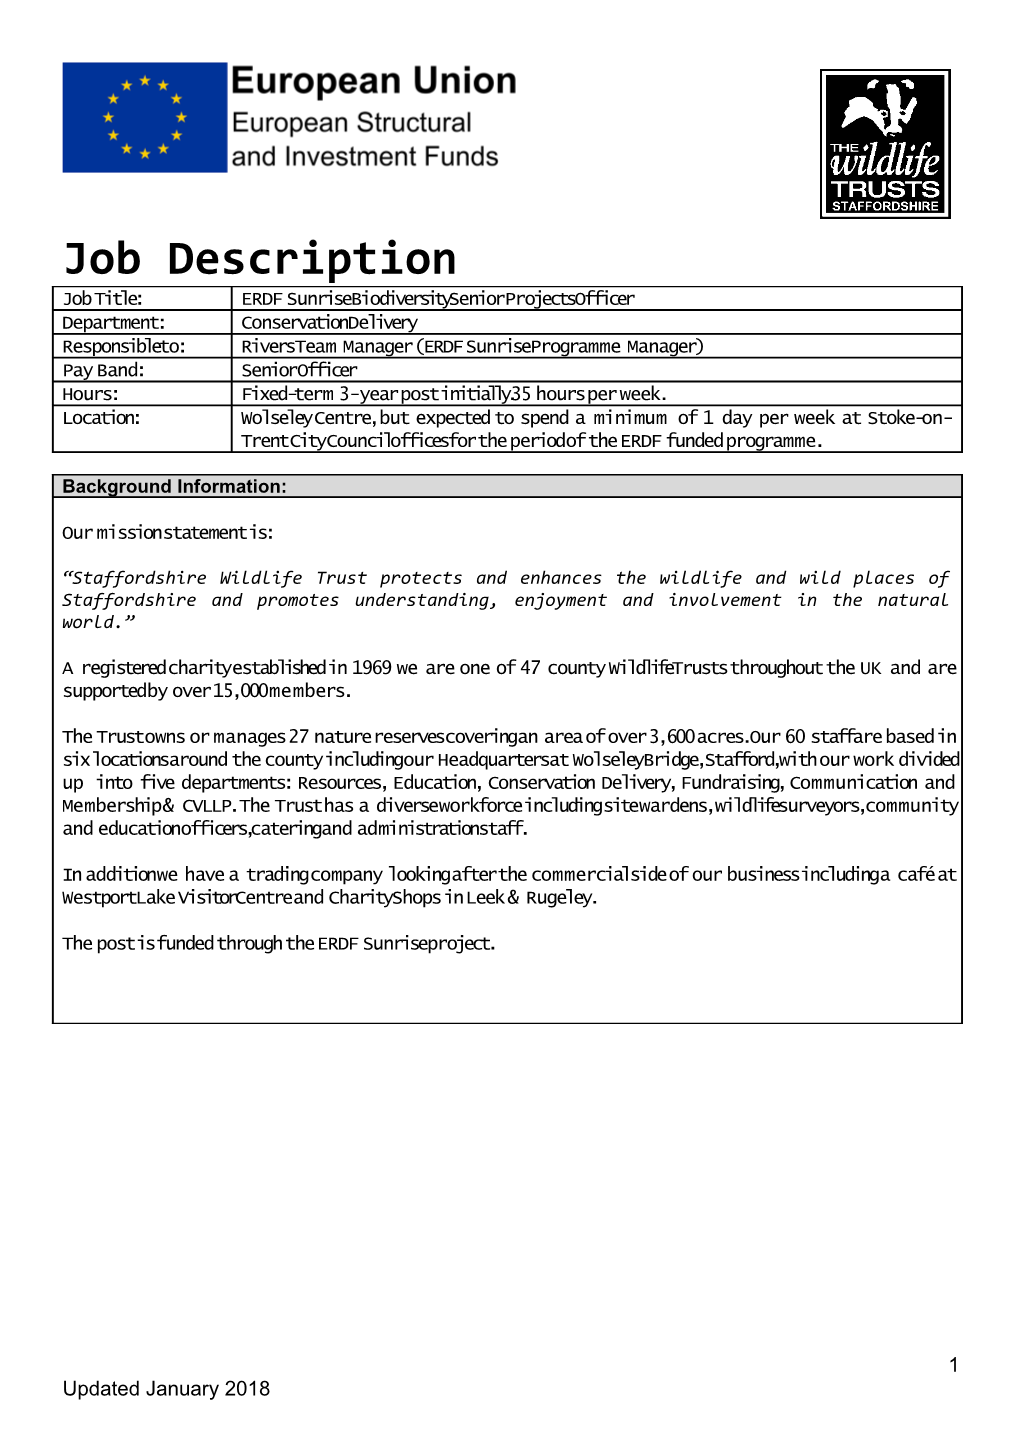 Person Specificationjob Title: ERDF Sunrise Senior Project Officer